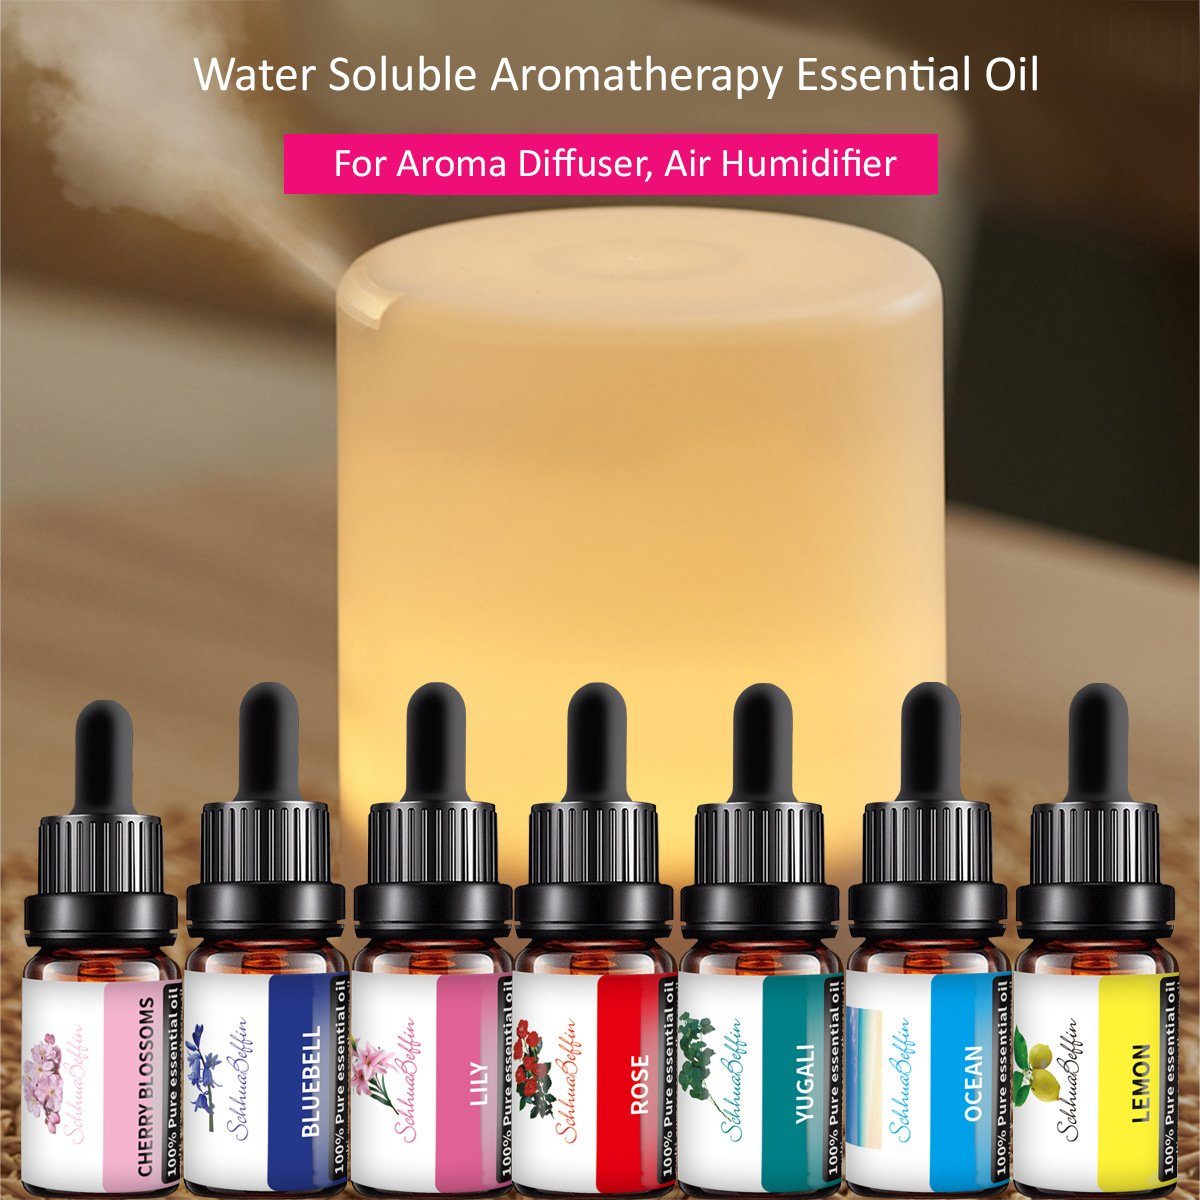 Multi-purpose 10ml Water Soluble Aromatherapy Essential Oil, Yugali Default ONE2WORLD 